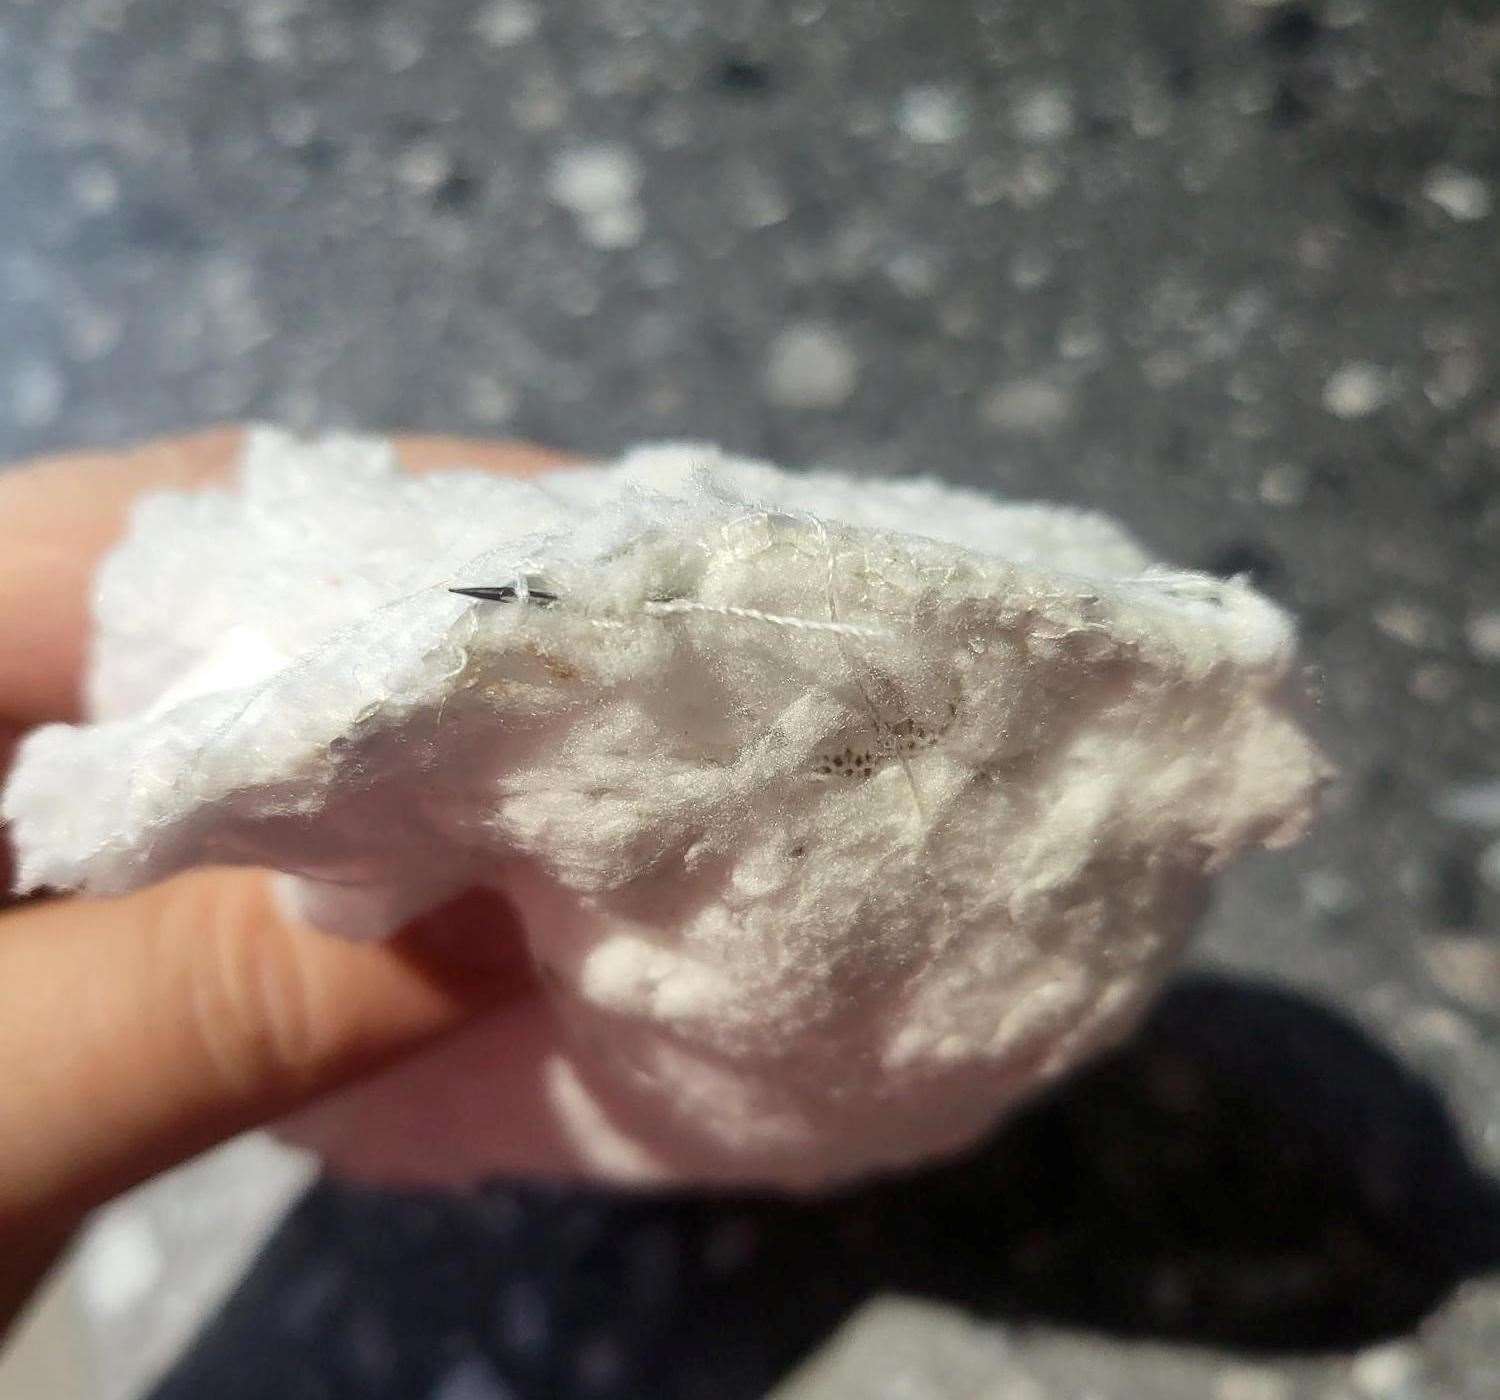 Samantha says she found a needle inside her daughter's slipper purchased from Poundstretcher